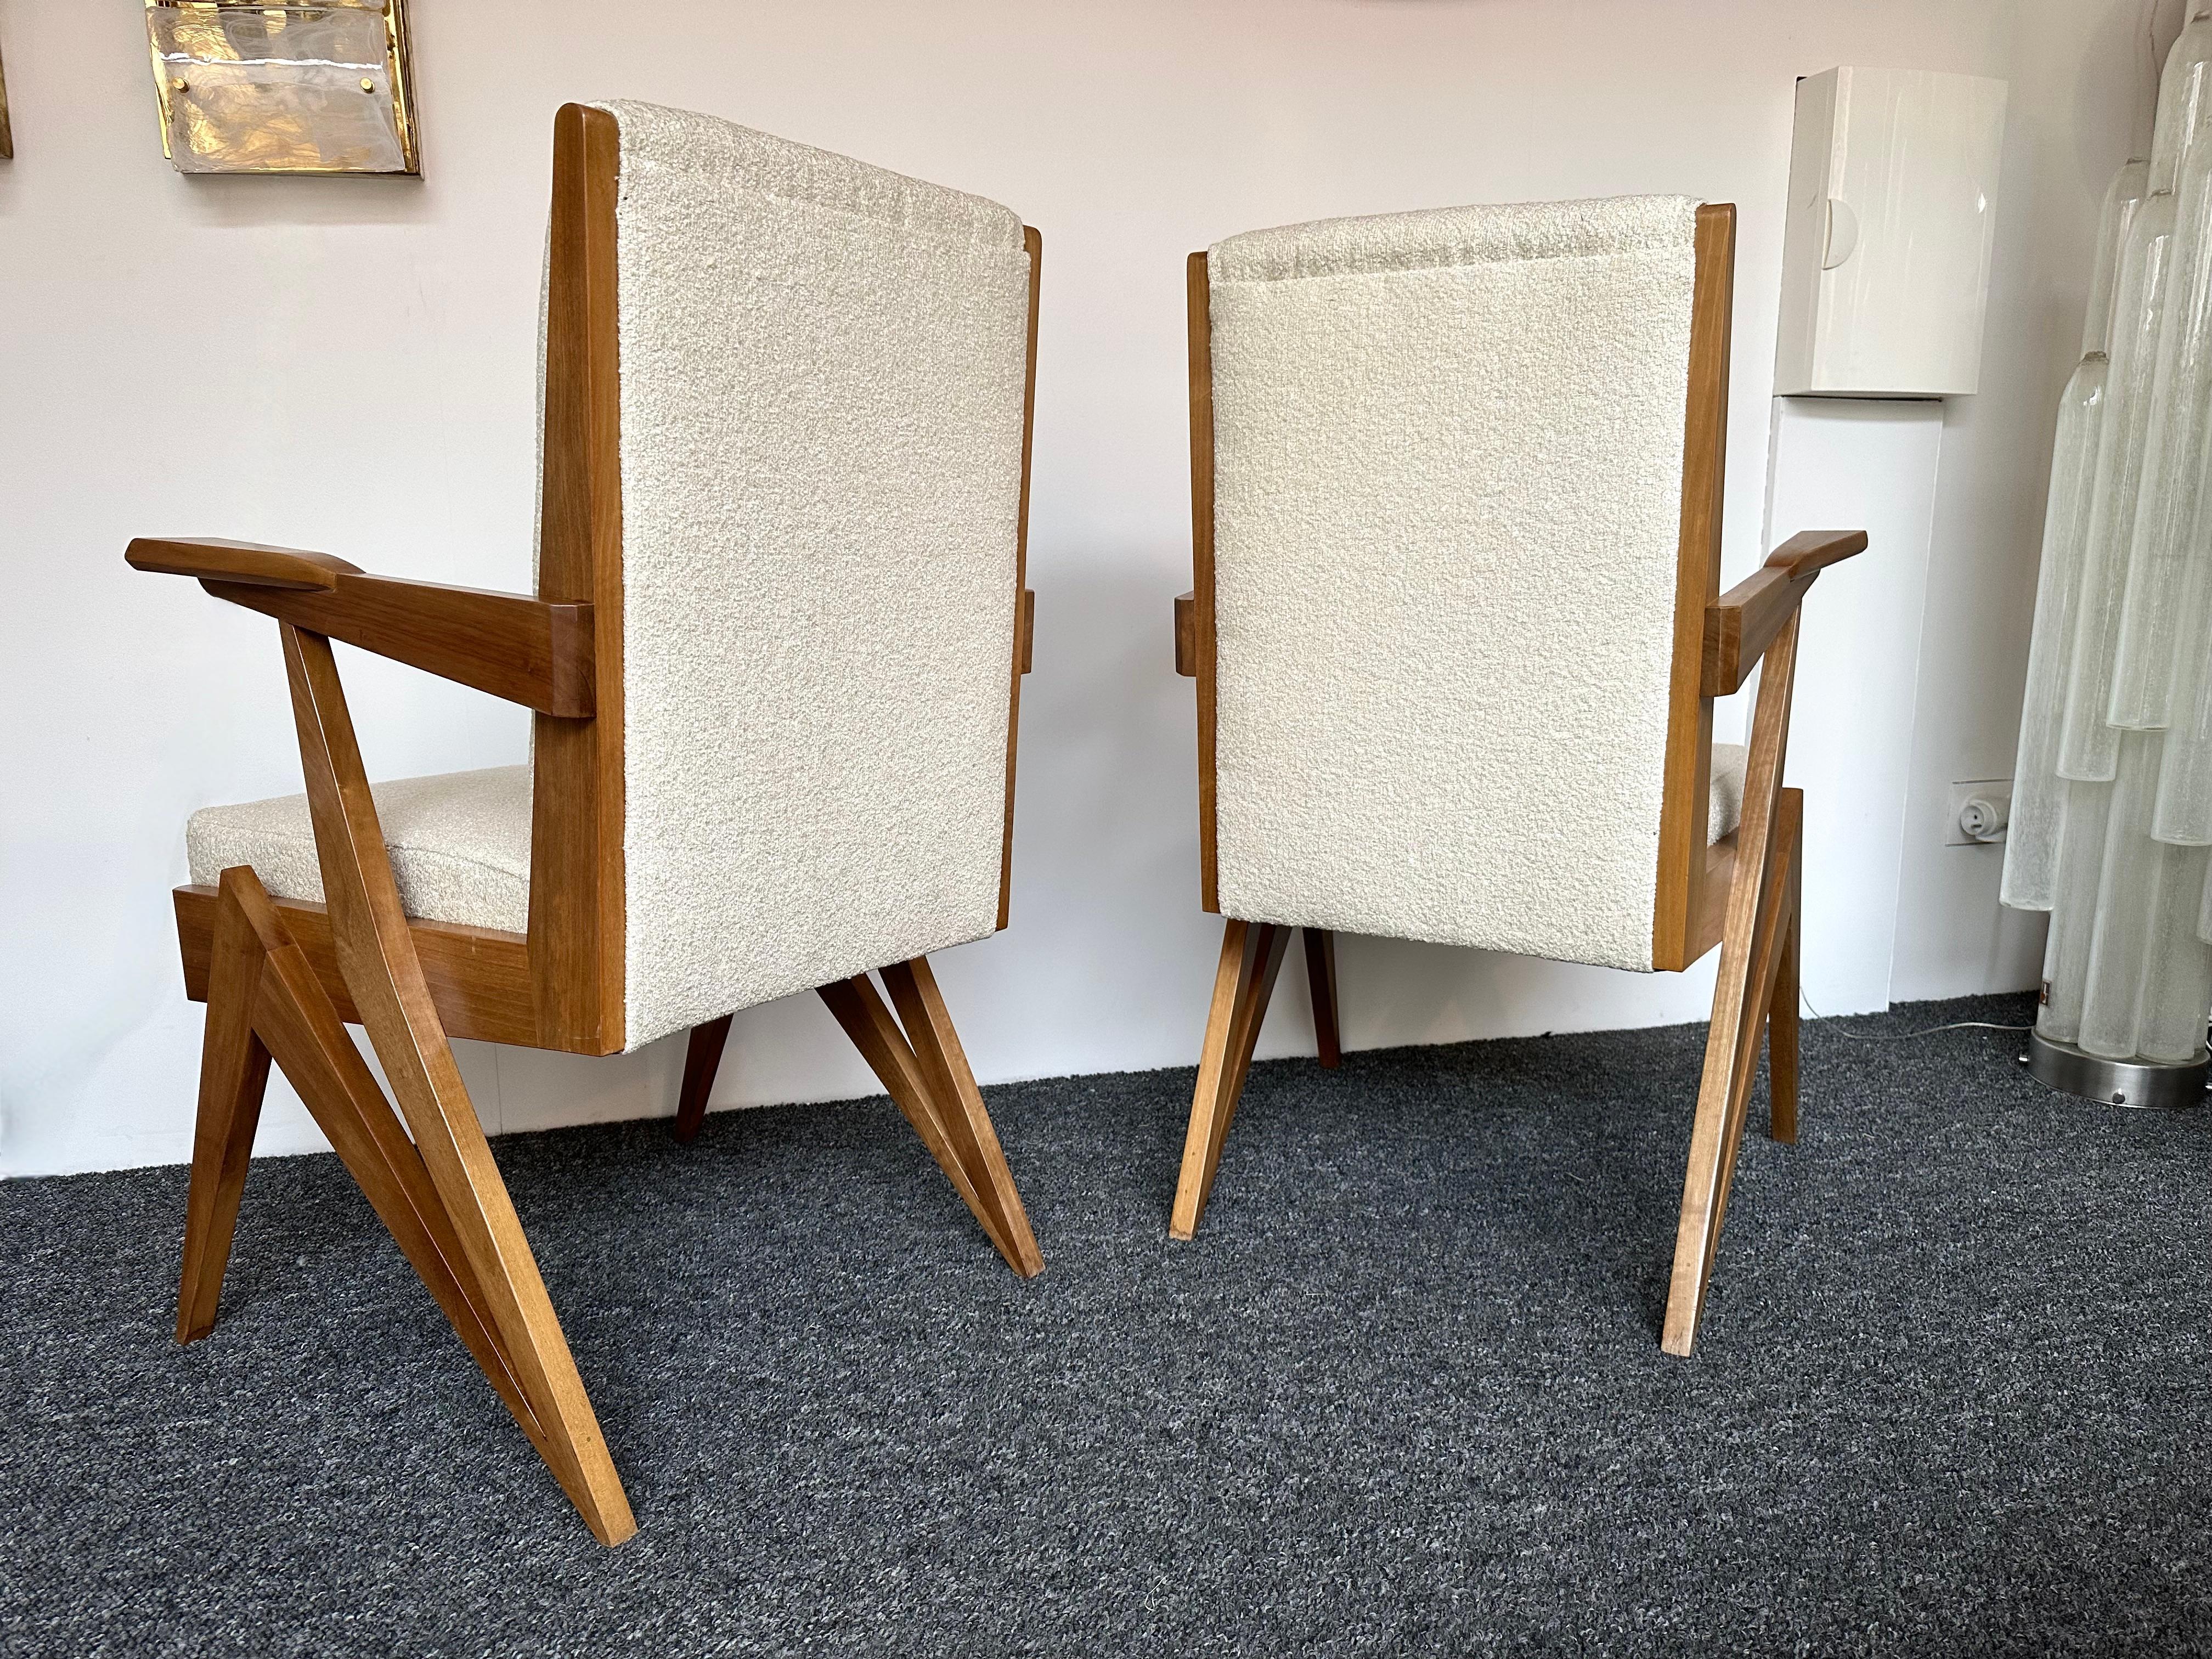 Italian Mid-Century Modern Pair of Compass Wood Armchairs, Italy, 1960s For Sale